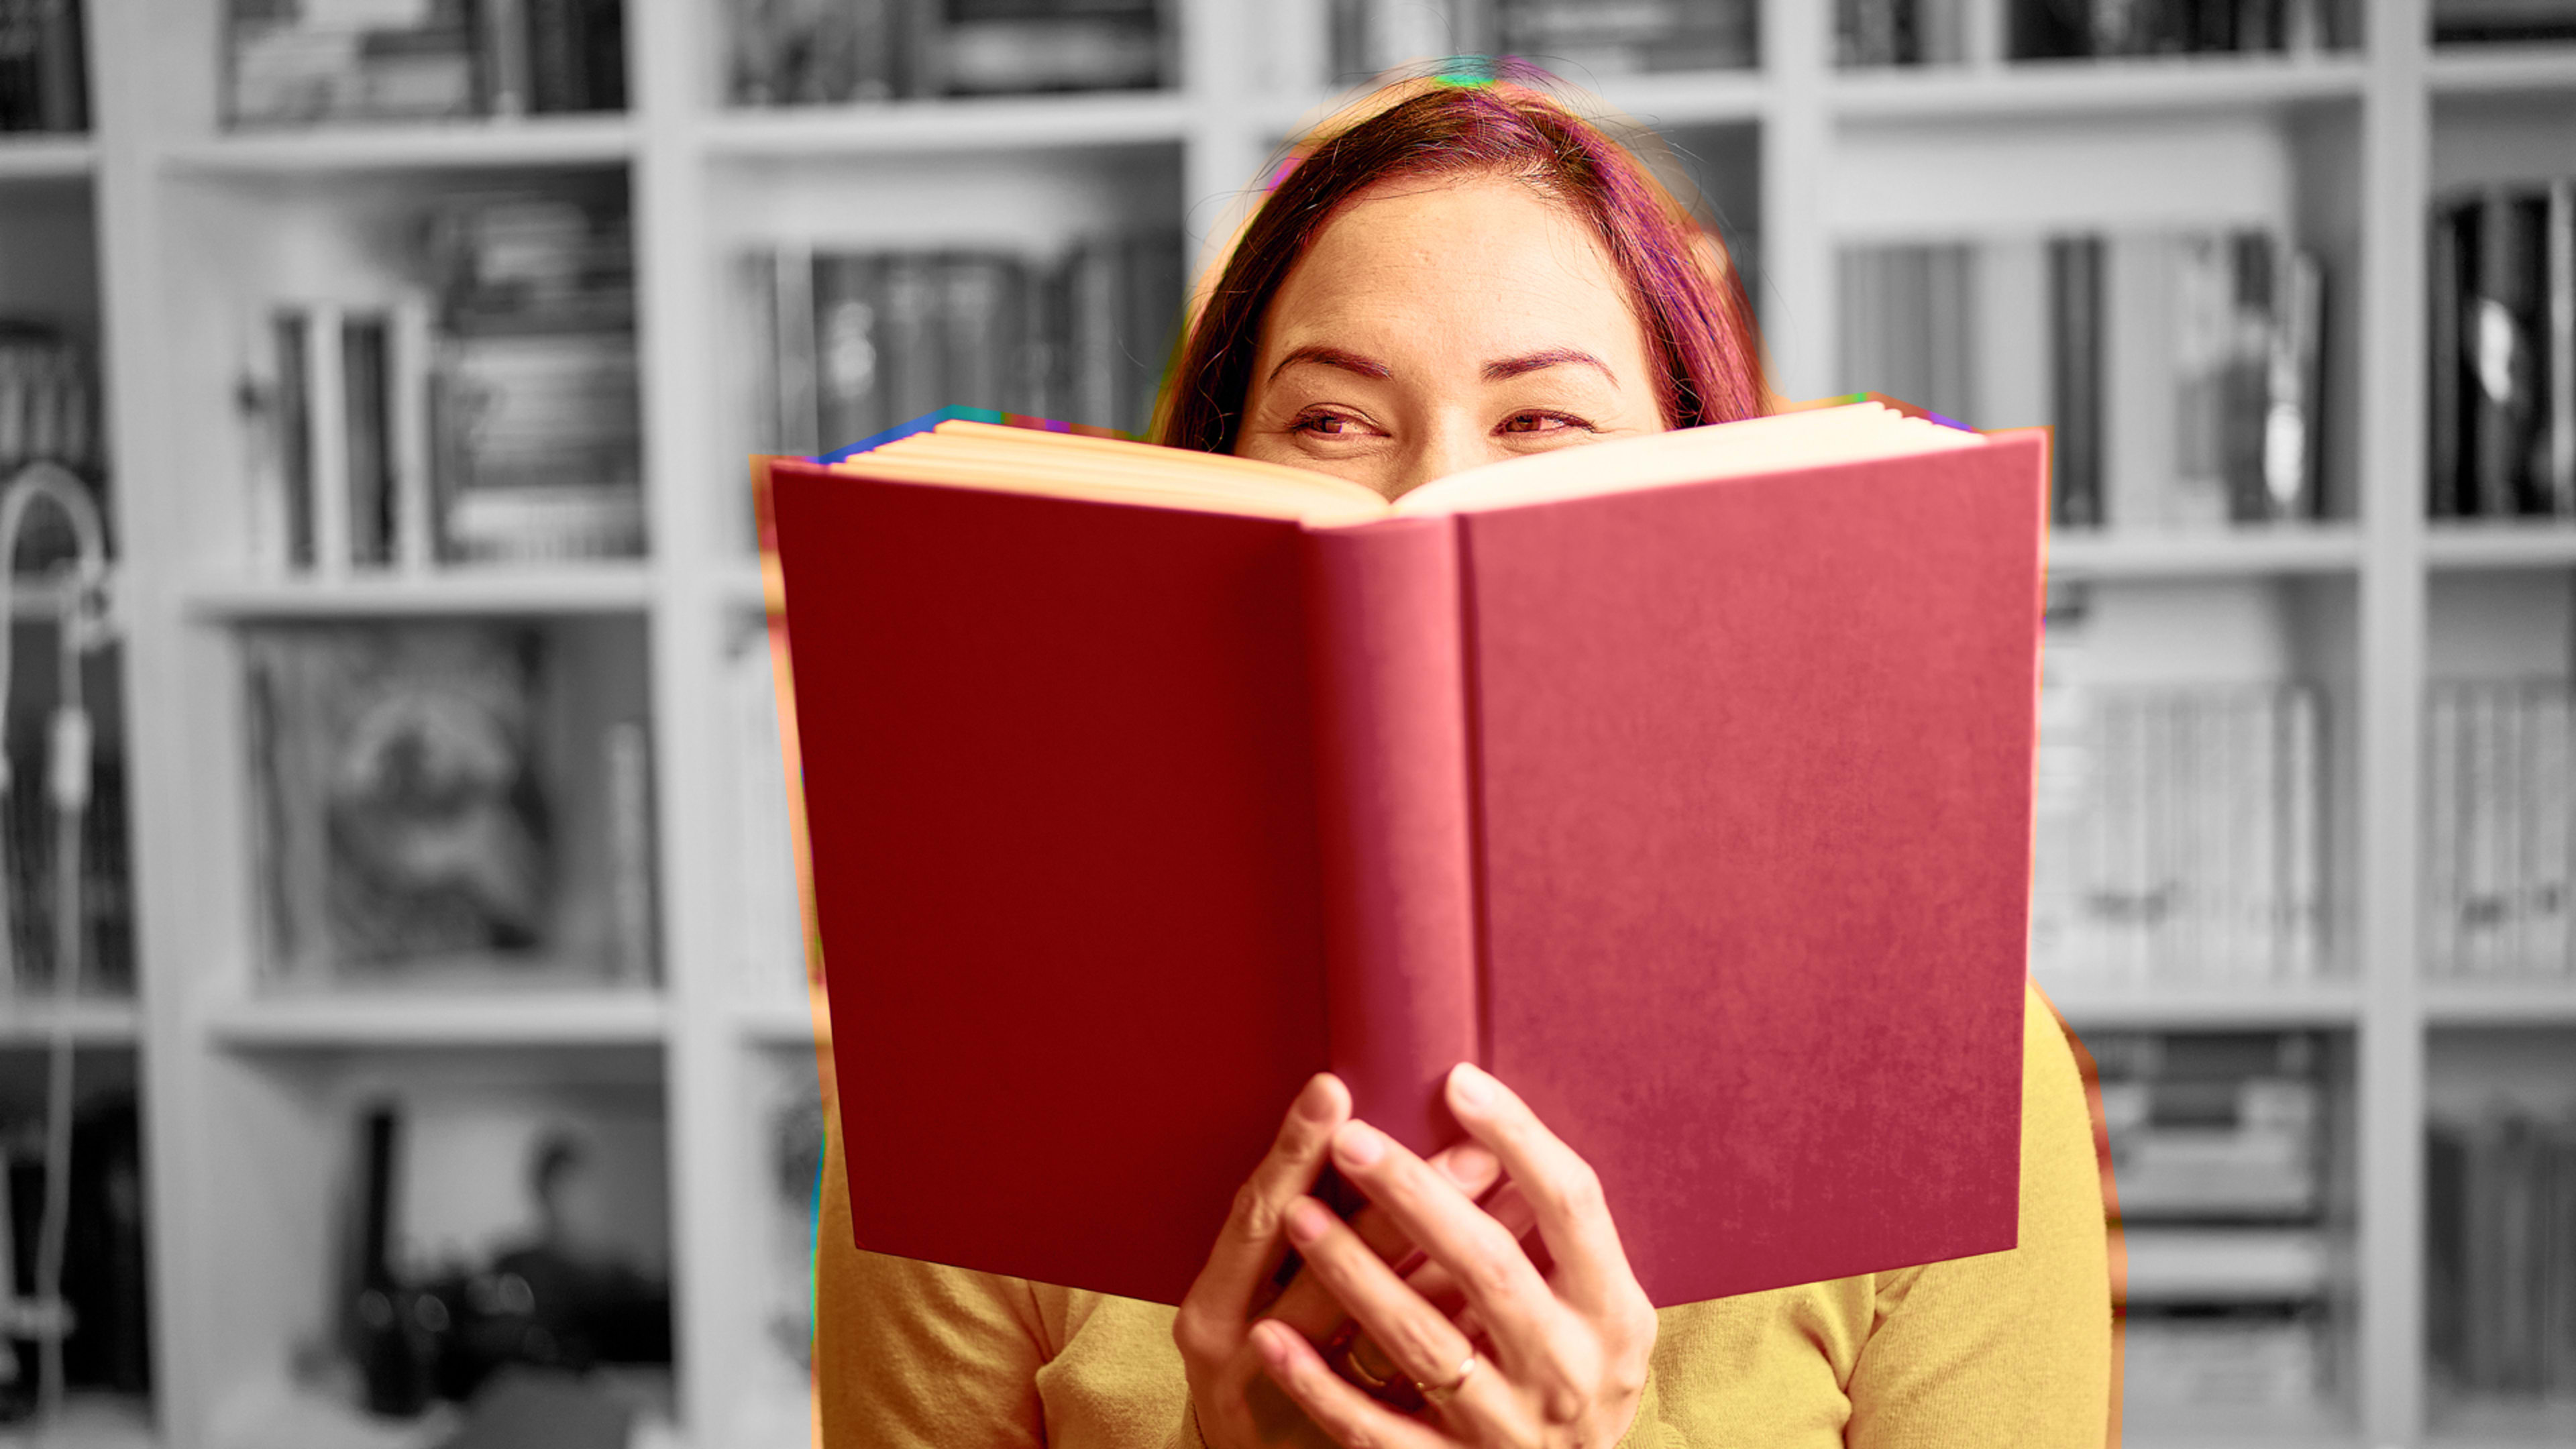 6 books to read if you want to be a better leader